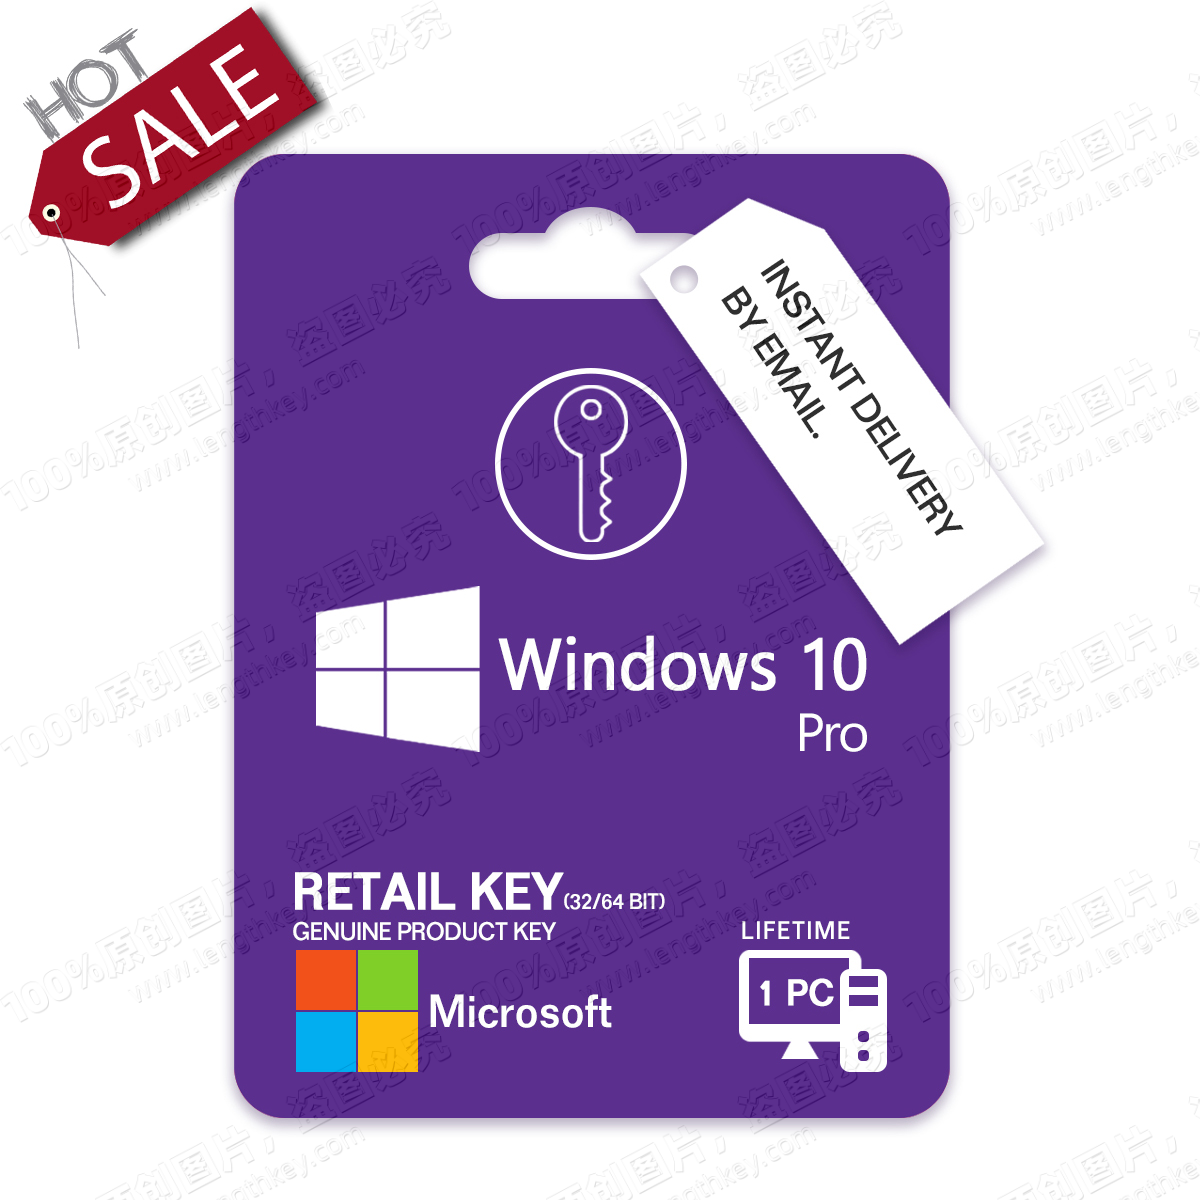 Windows 10 Pro (Original) Digital License Key (Email Delivery in 2 Hours)  Life Time Validity 1 PC, 1 User – Trex Plus